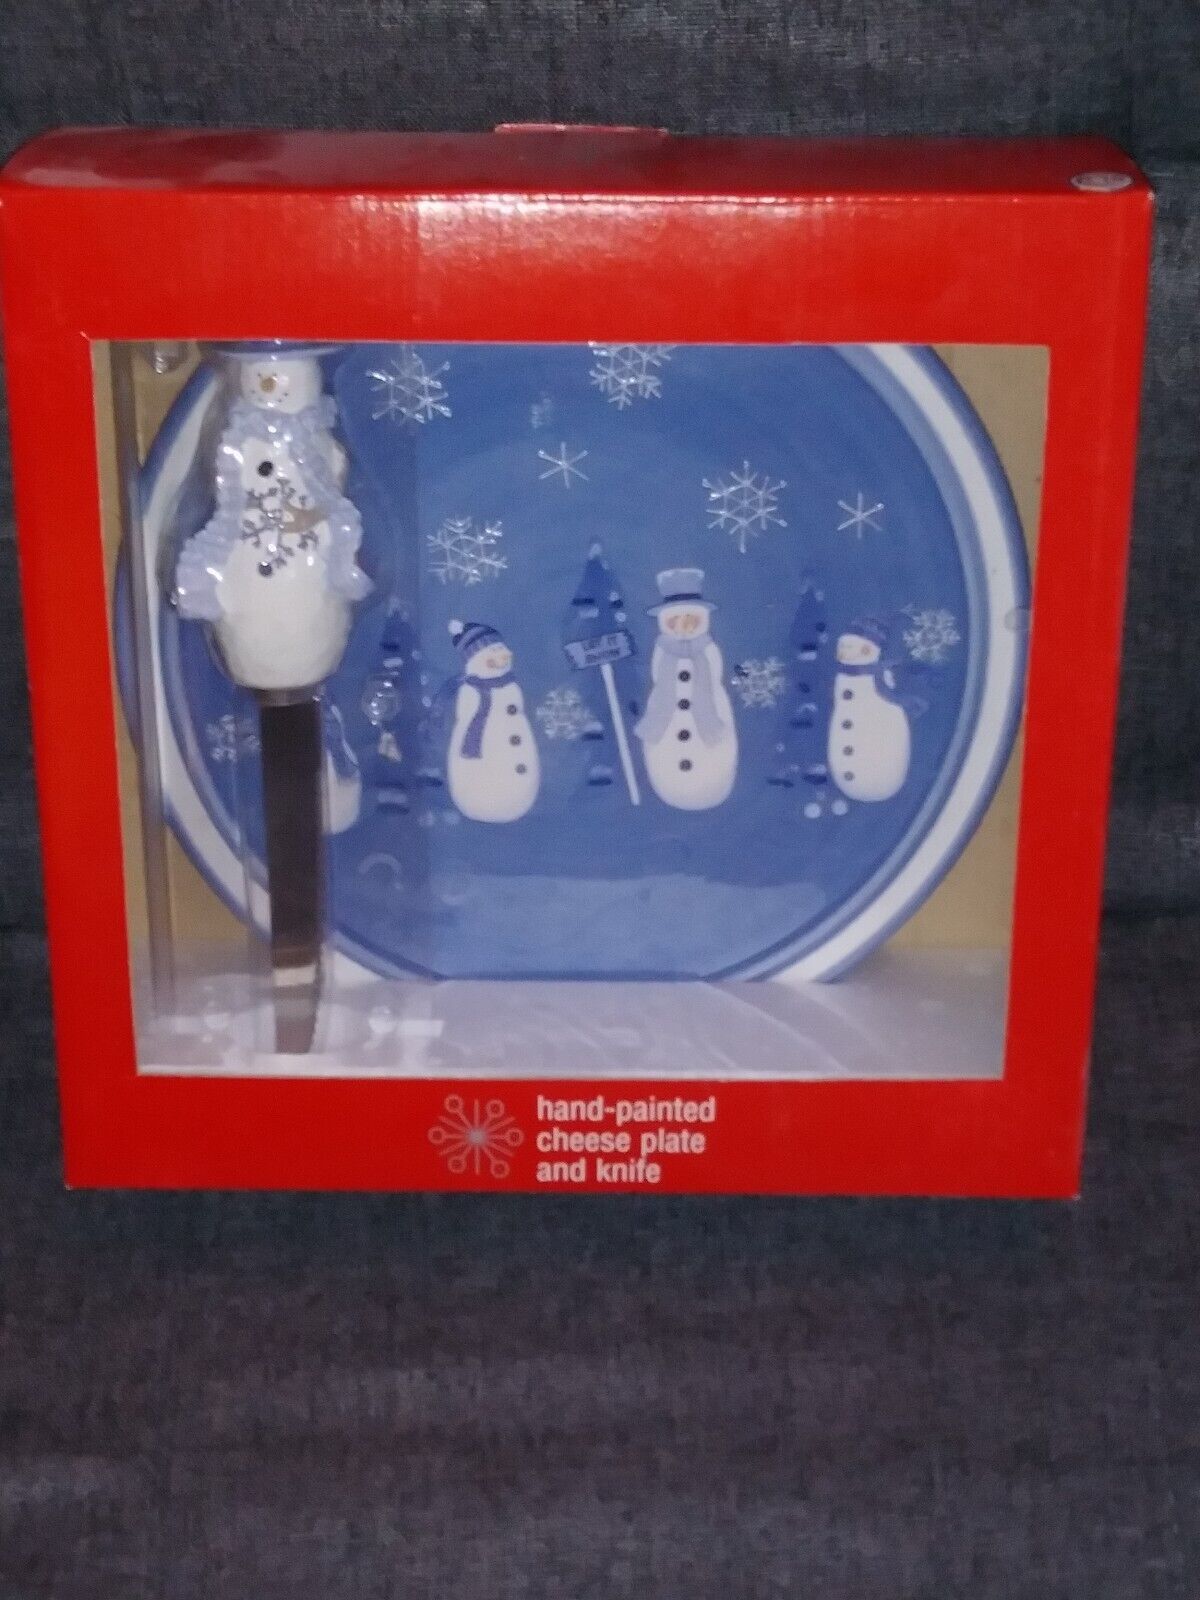 CHRISTMAS DECORATION Snowman Hand-painted Cheese Plate and Knife Set KOHLS - $6.92